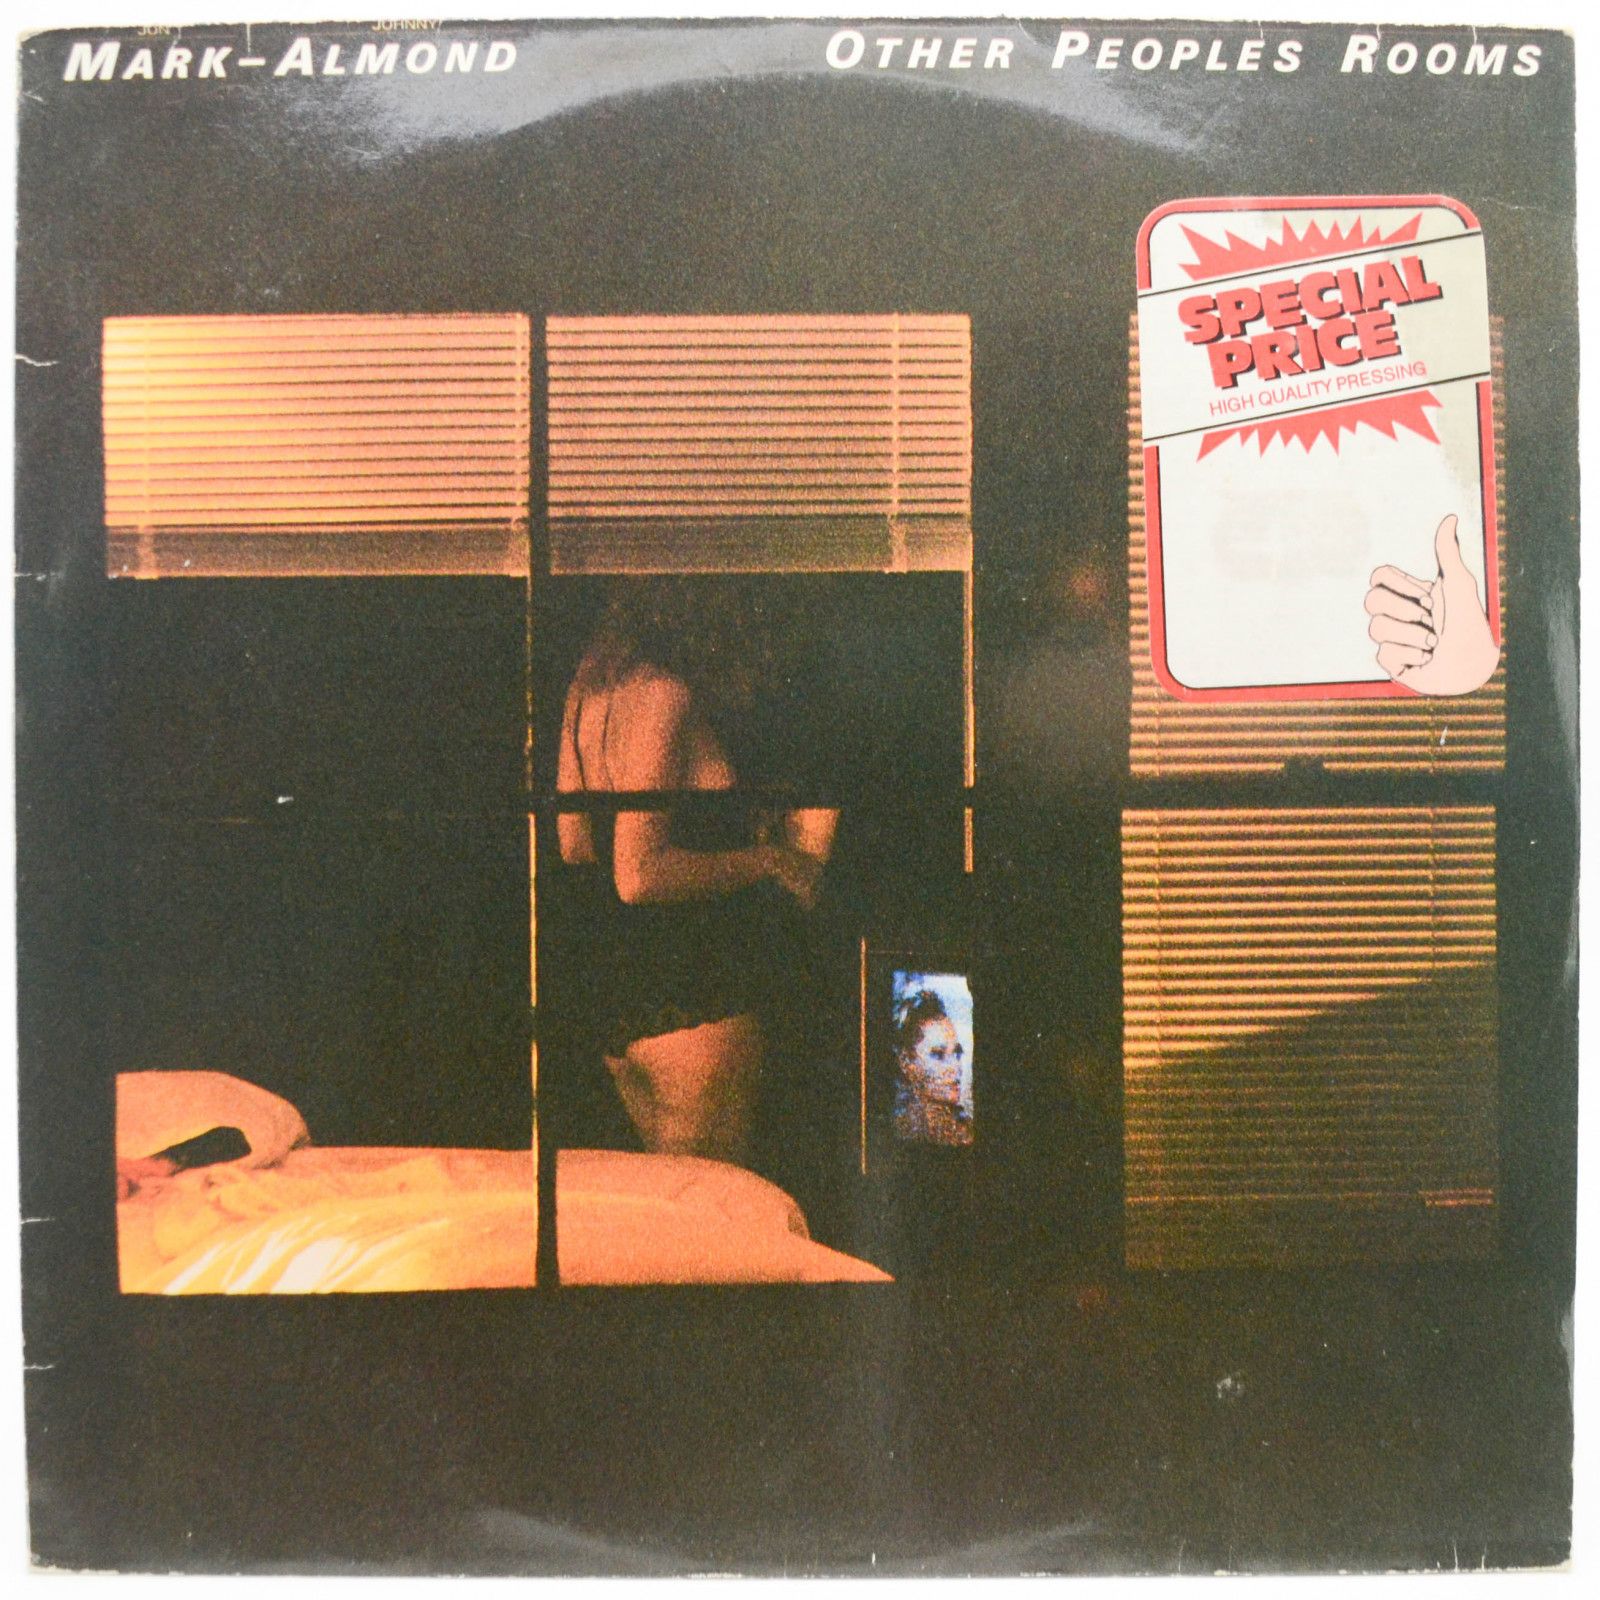 Mark Almond — Other Peoples Rooms, 1978